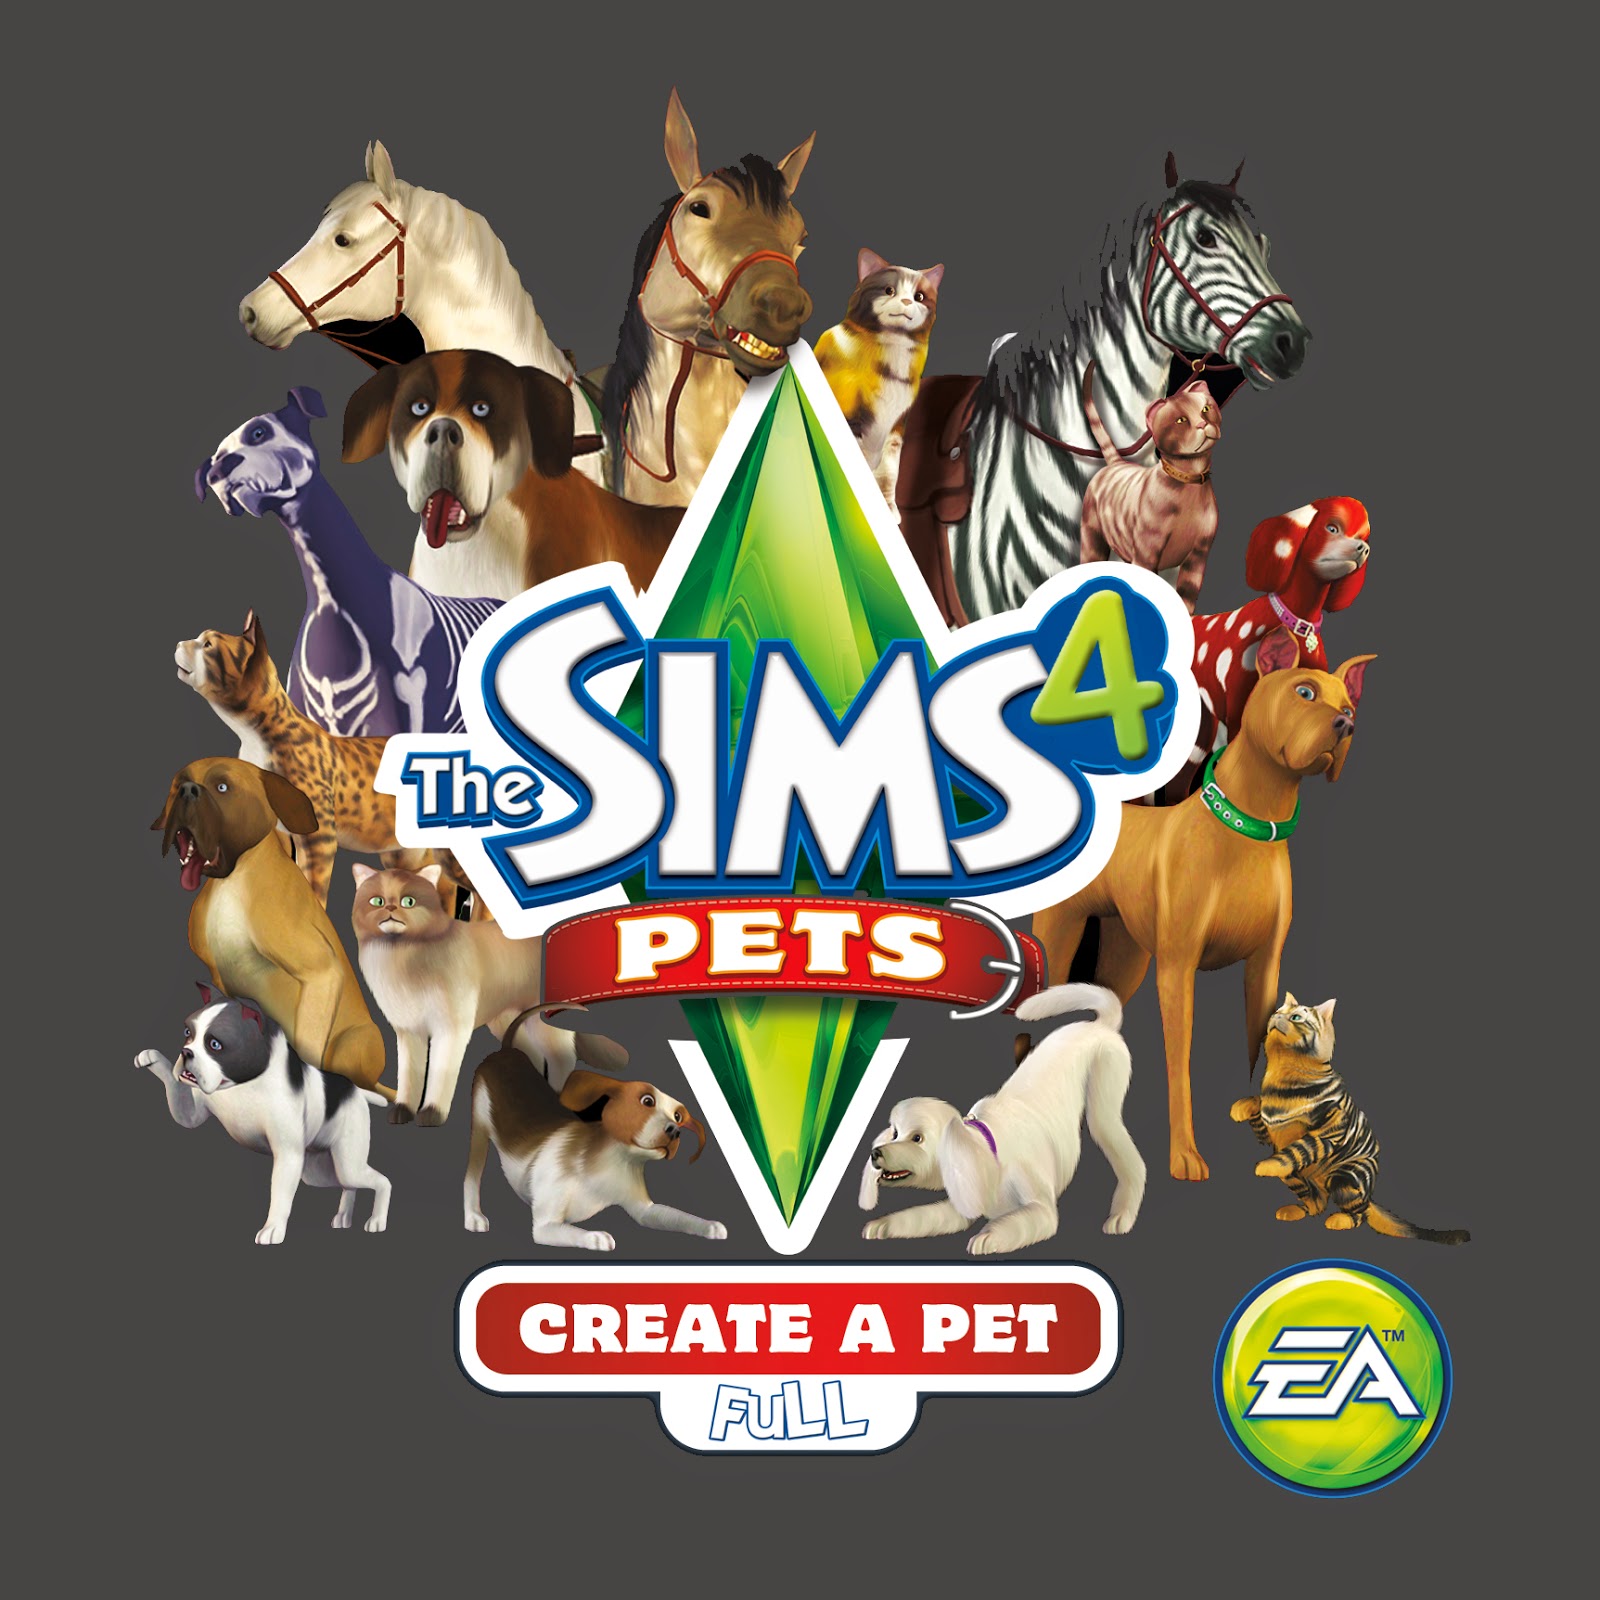 sims 4 pets download for pc